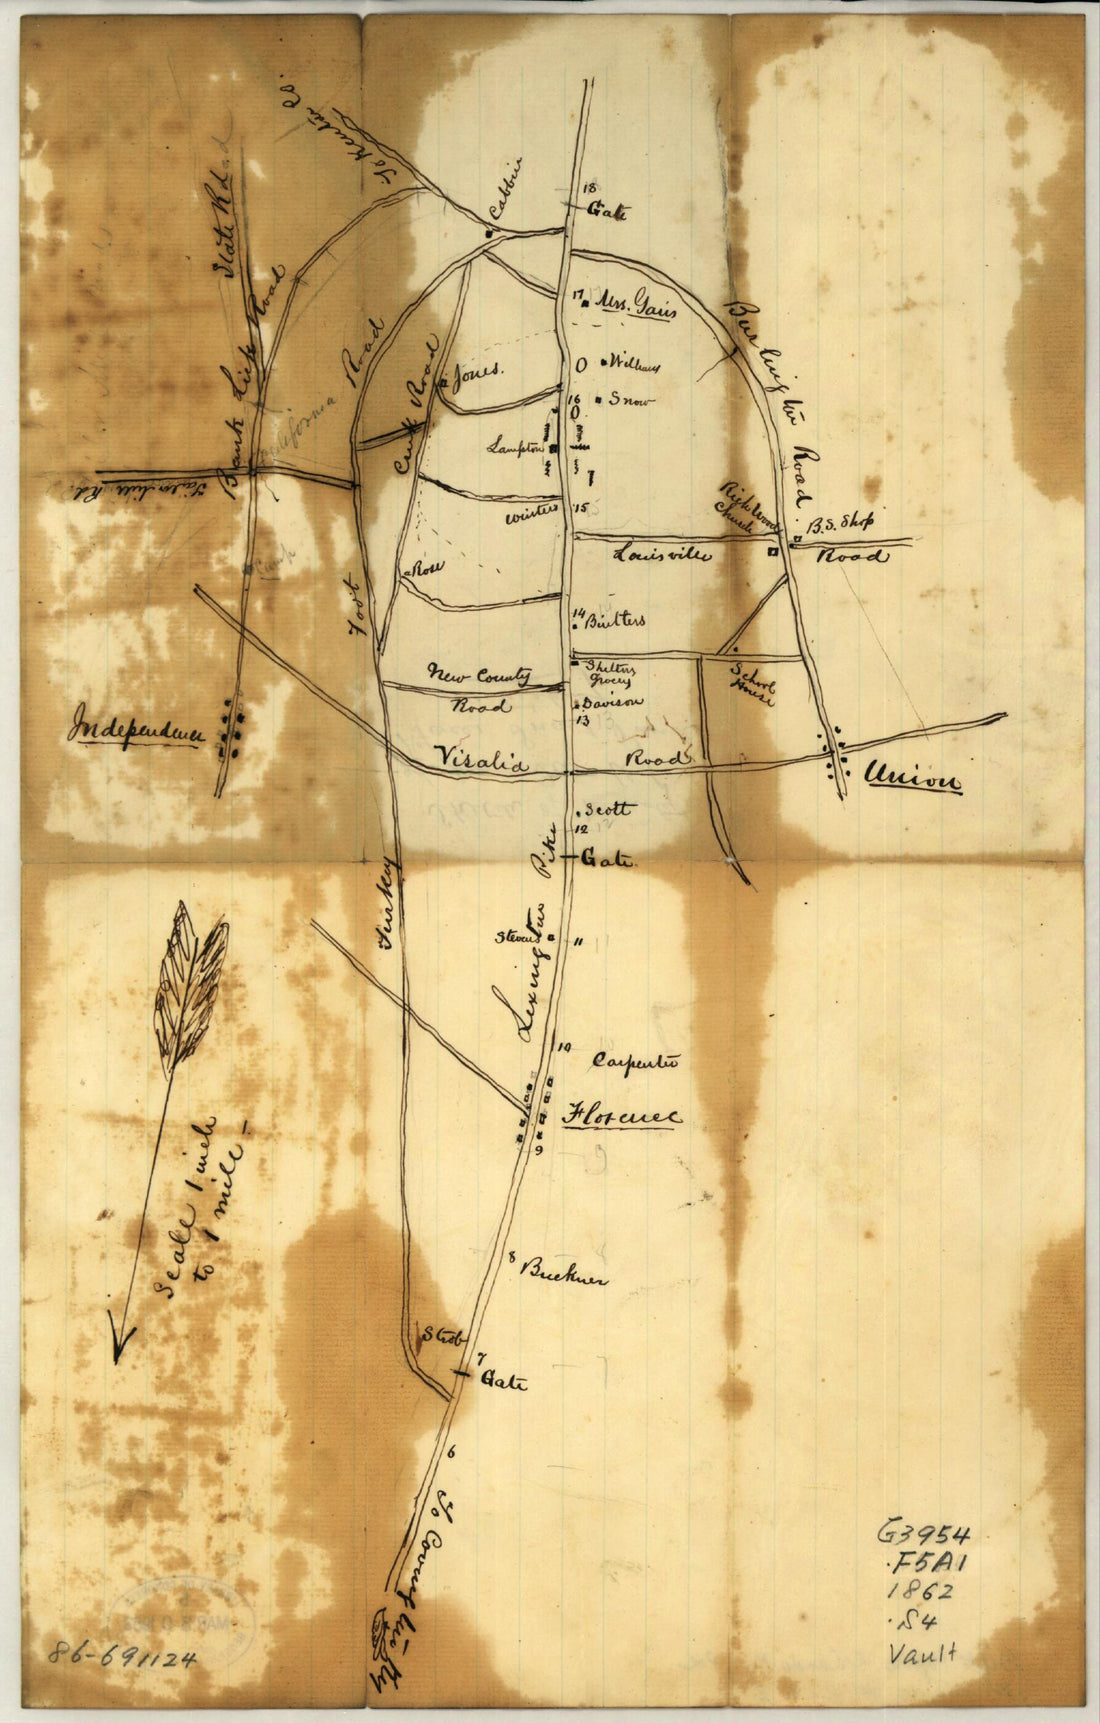 This old map of Sketch of Vicinity of Head Qtrs. U.S. Forces, Snows Pond, Kentuckey sic from 1862 was created by O. M. (Orlando Metcalfe) Poe in 1862